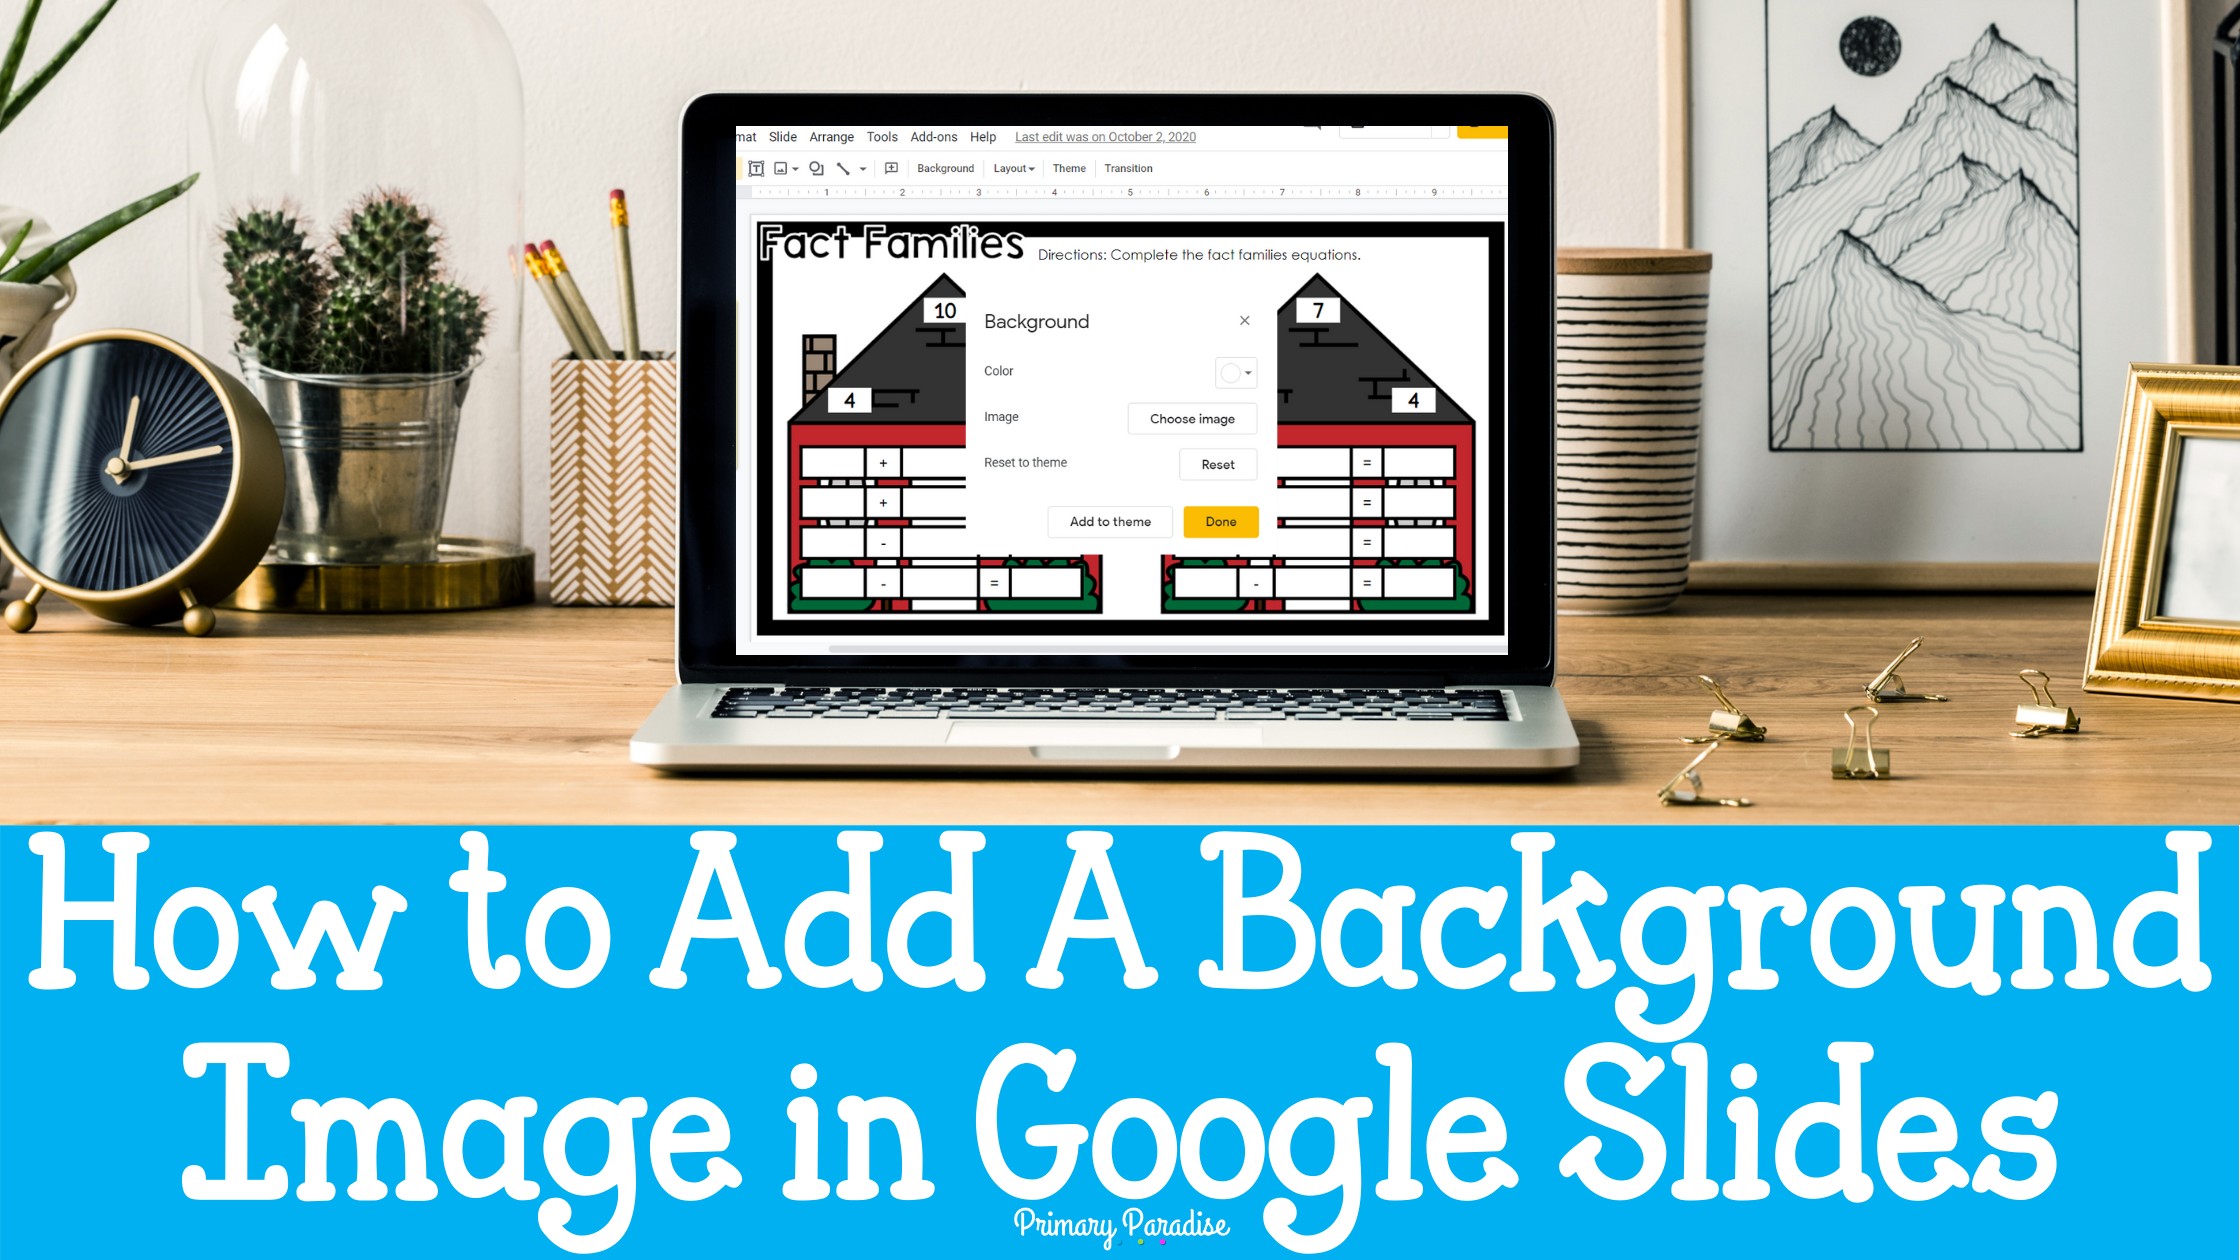 How to Add a Background Image in Google Slides